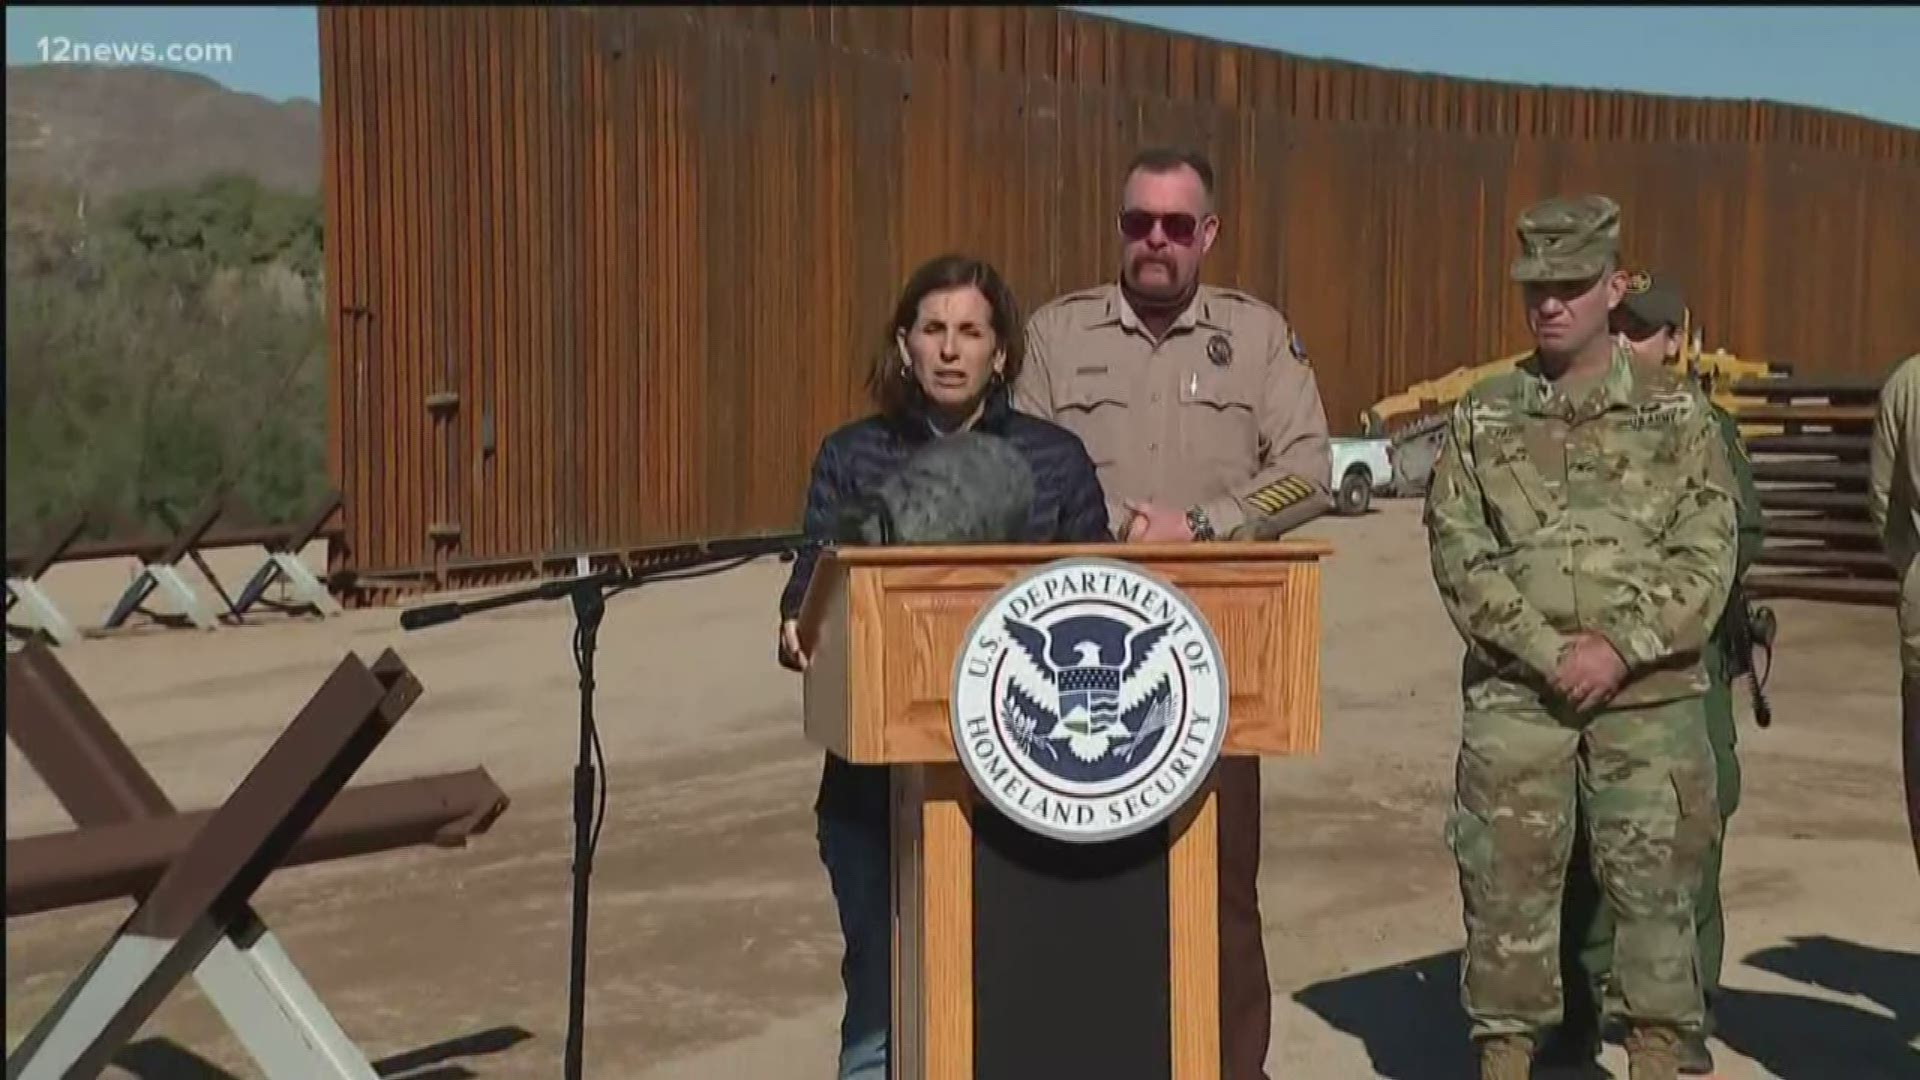 The Trump administration is marking a milestone for border wall construction, the 100th mile of fencing built near Yuma.